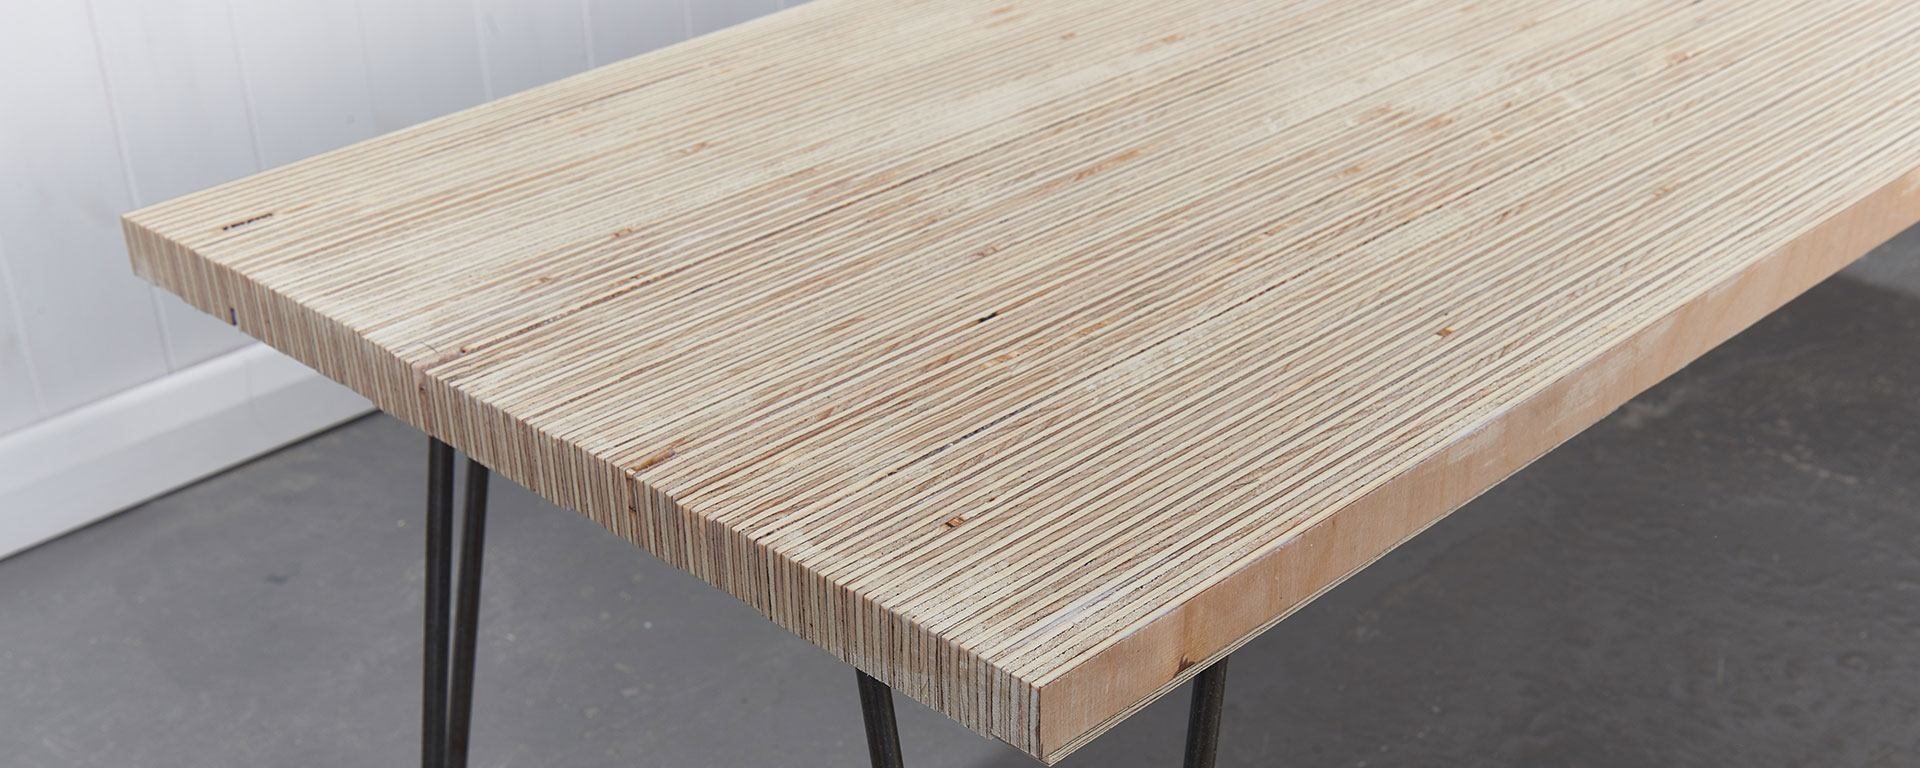 PLYWOOD END GRAIN COFFEE TABLE